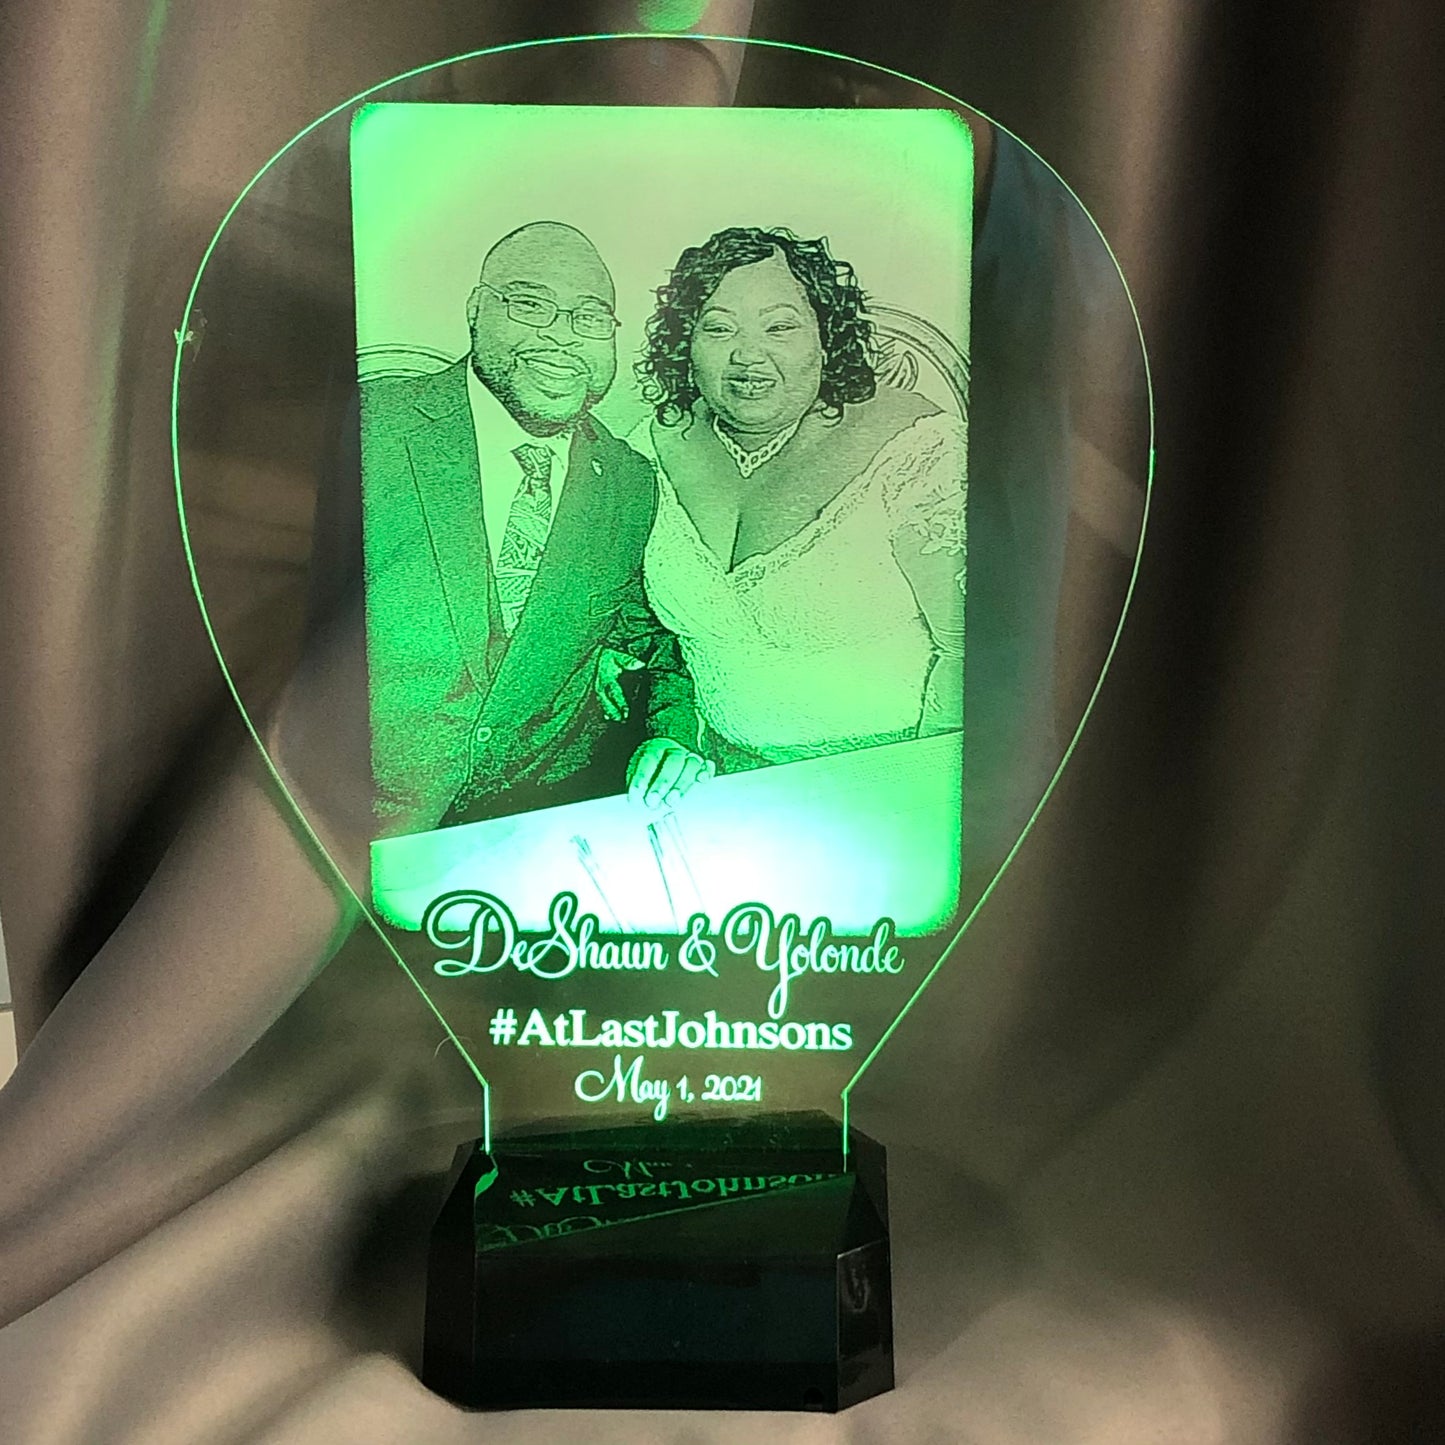 Our Anniversary Photo Multi-Colored Light Up Gift is such a fun personalized anniversary photo gift! Let us custom make this awesome present for anyone on your list from your favorite photo! You will love the way the multi-colored LED lights add a soft glow to your favorite picture. Our Personalized Multi-Colored Photo Light Up is a awesome affordable picture gift for yourself or anyone on your list.